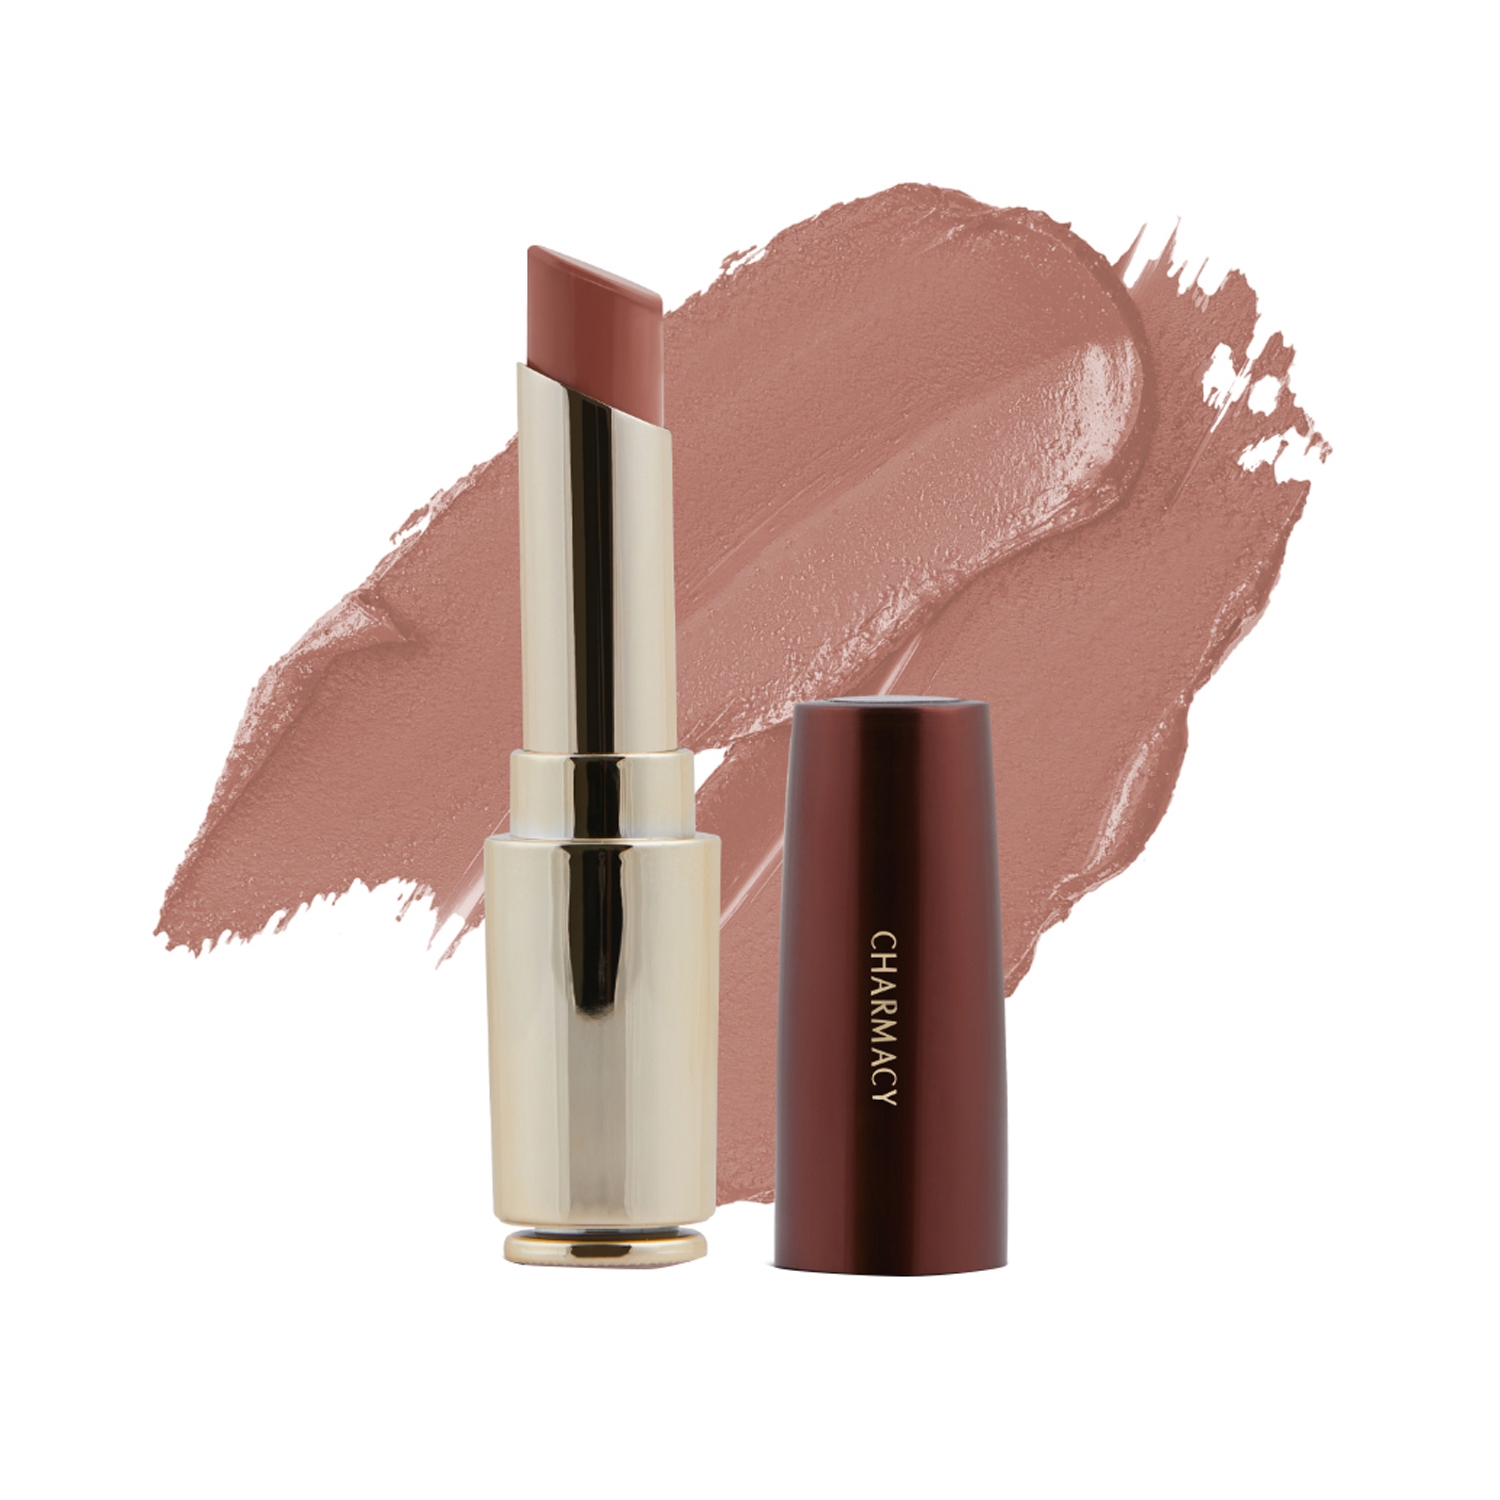 Charmacy Milano | Charmacy Milano Flattering Nude Lipstick - 04 Lets Cuddle (3.8g)